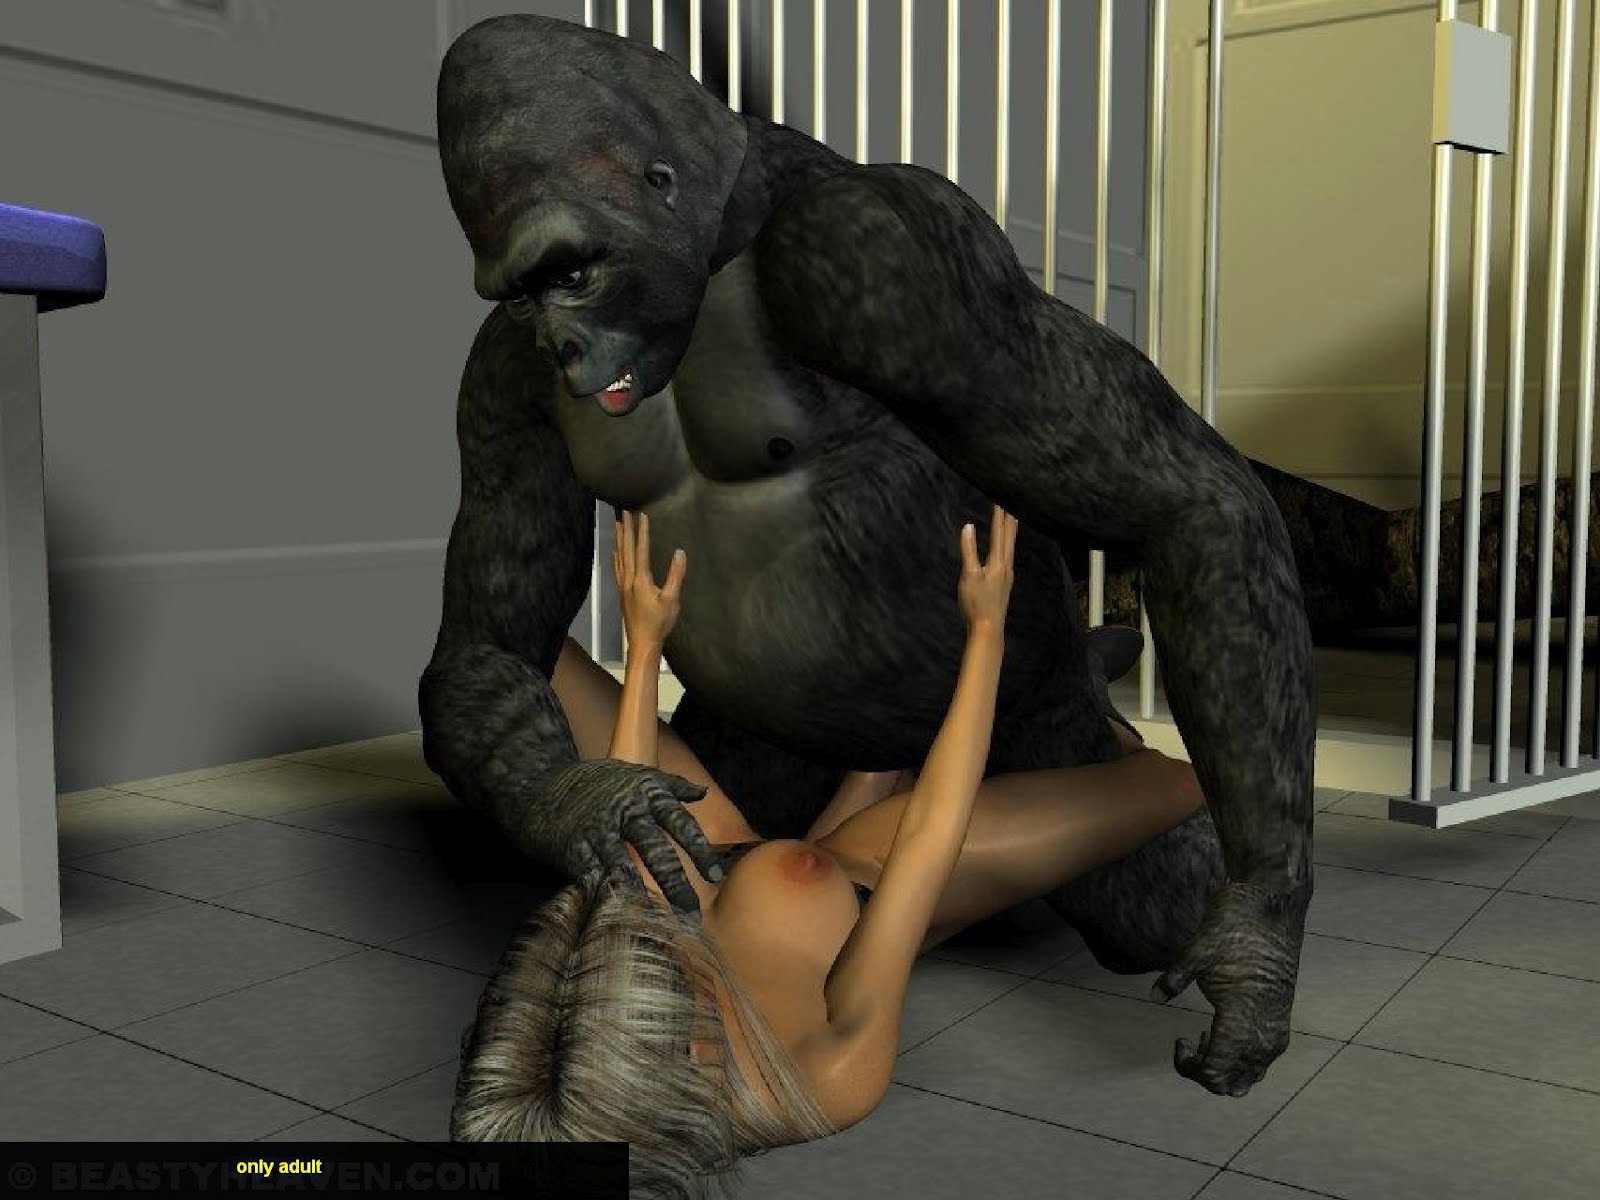 1600px x 1200px - Girl with gorilla sex 3gp video pron clips